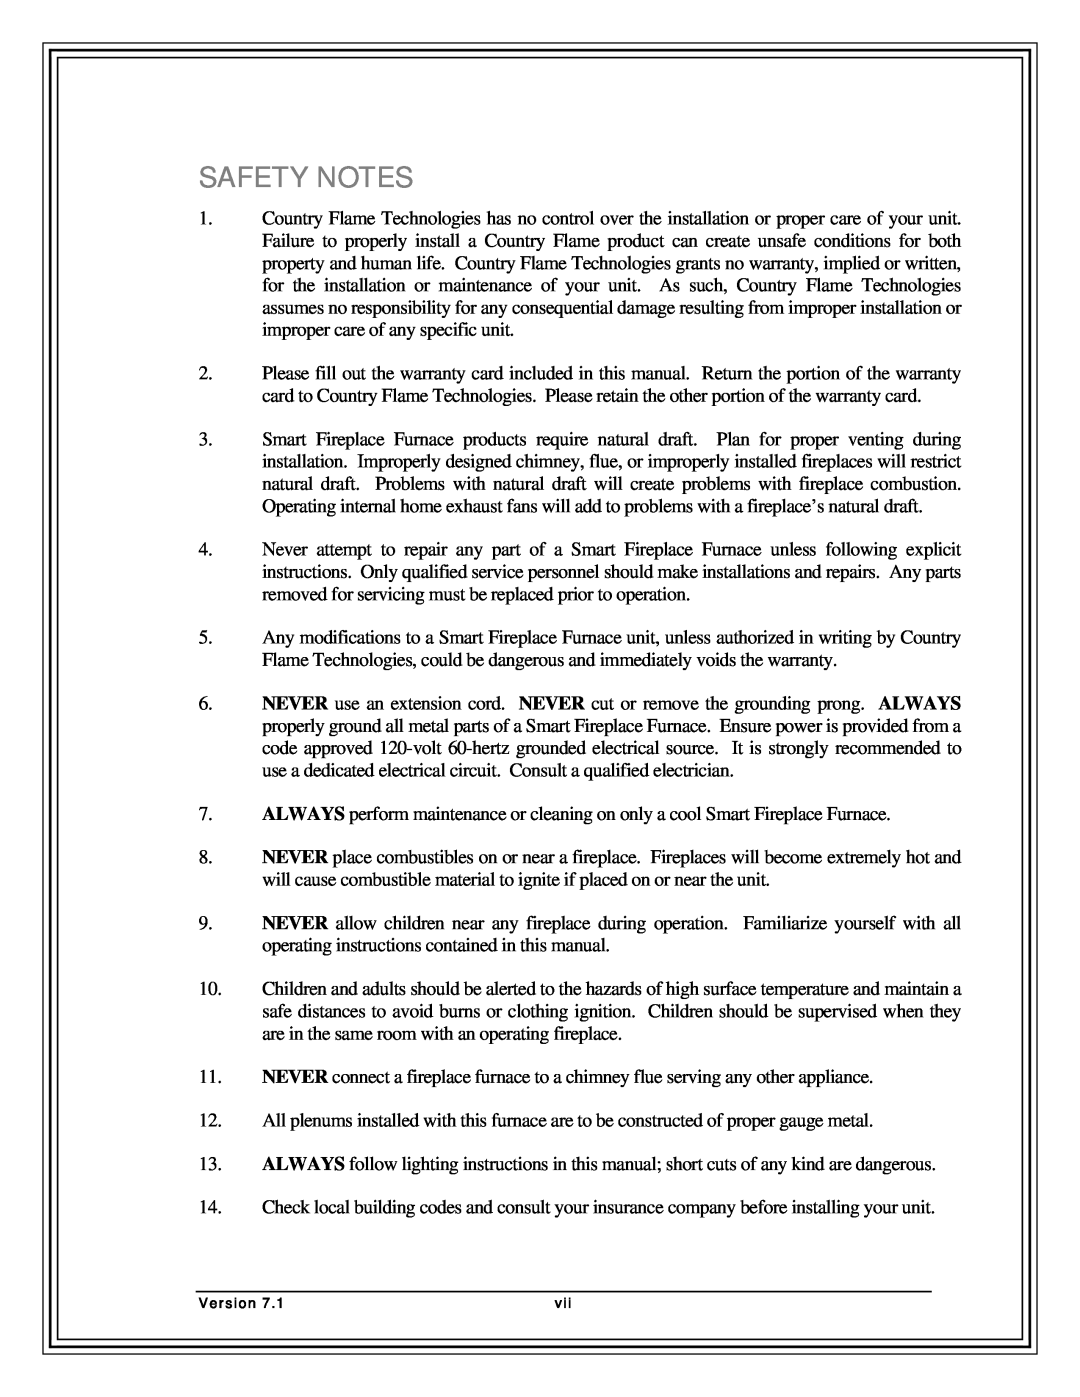 Country Flame Fireplace FP33, FP42, FP37 manual Safety Notes, Version 